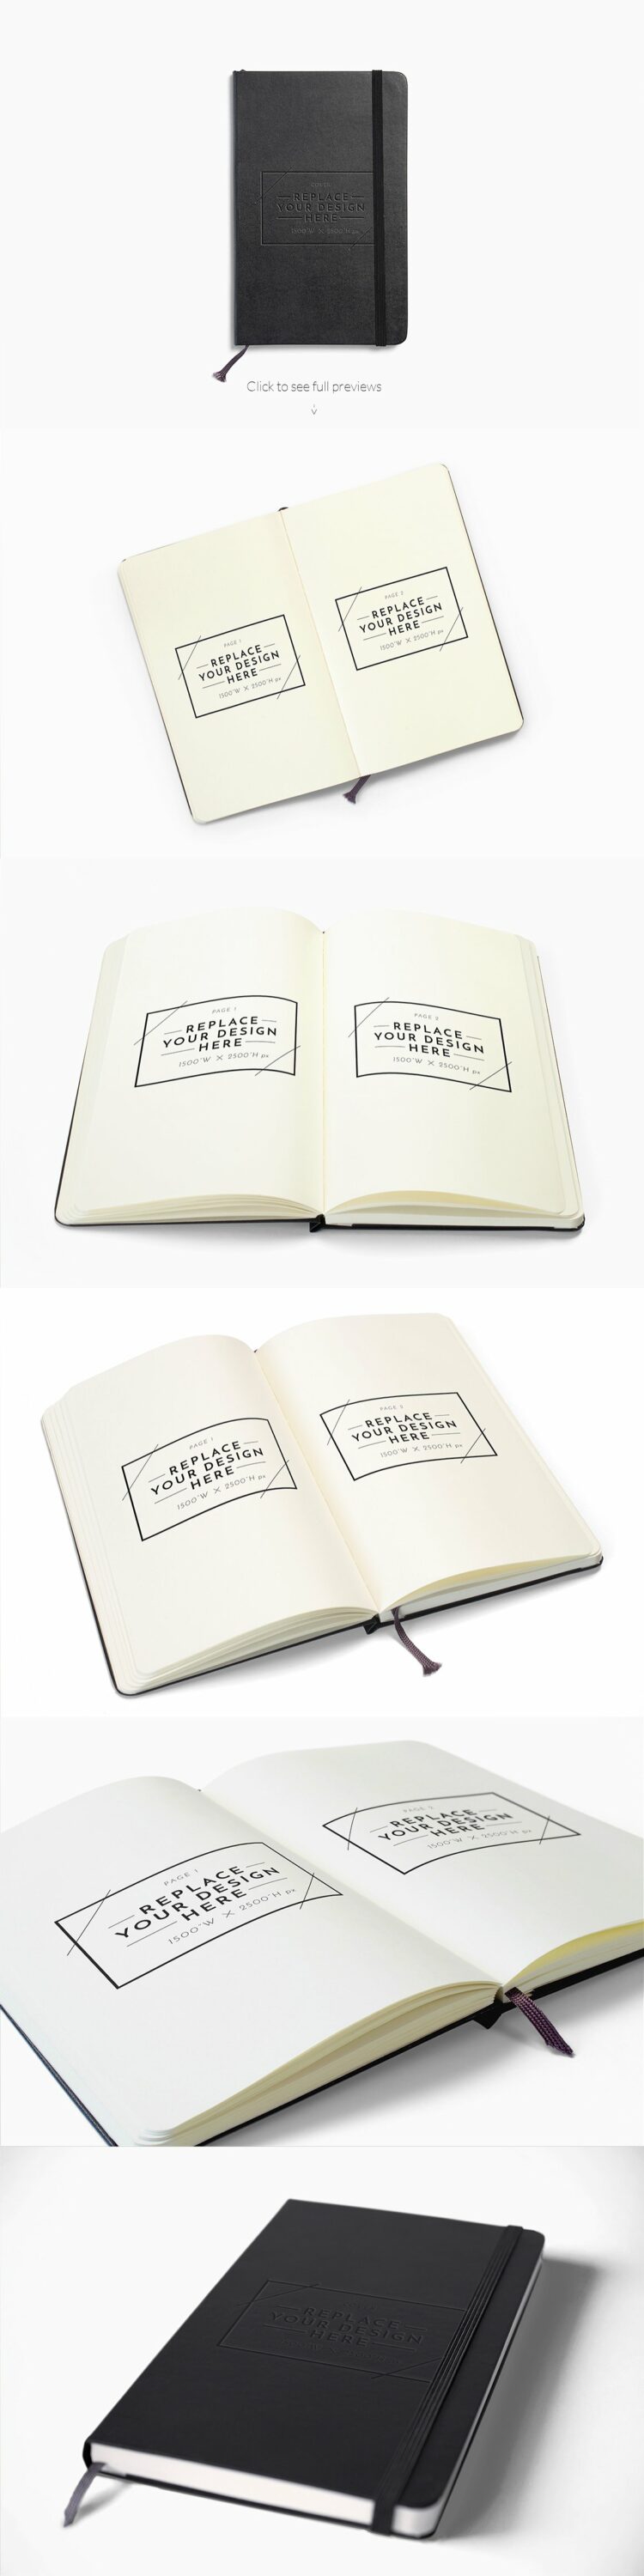 Black notebook mockups and its 4 different open views on a white background.